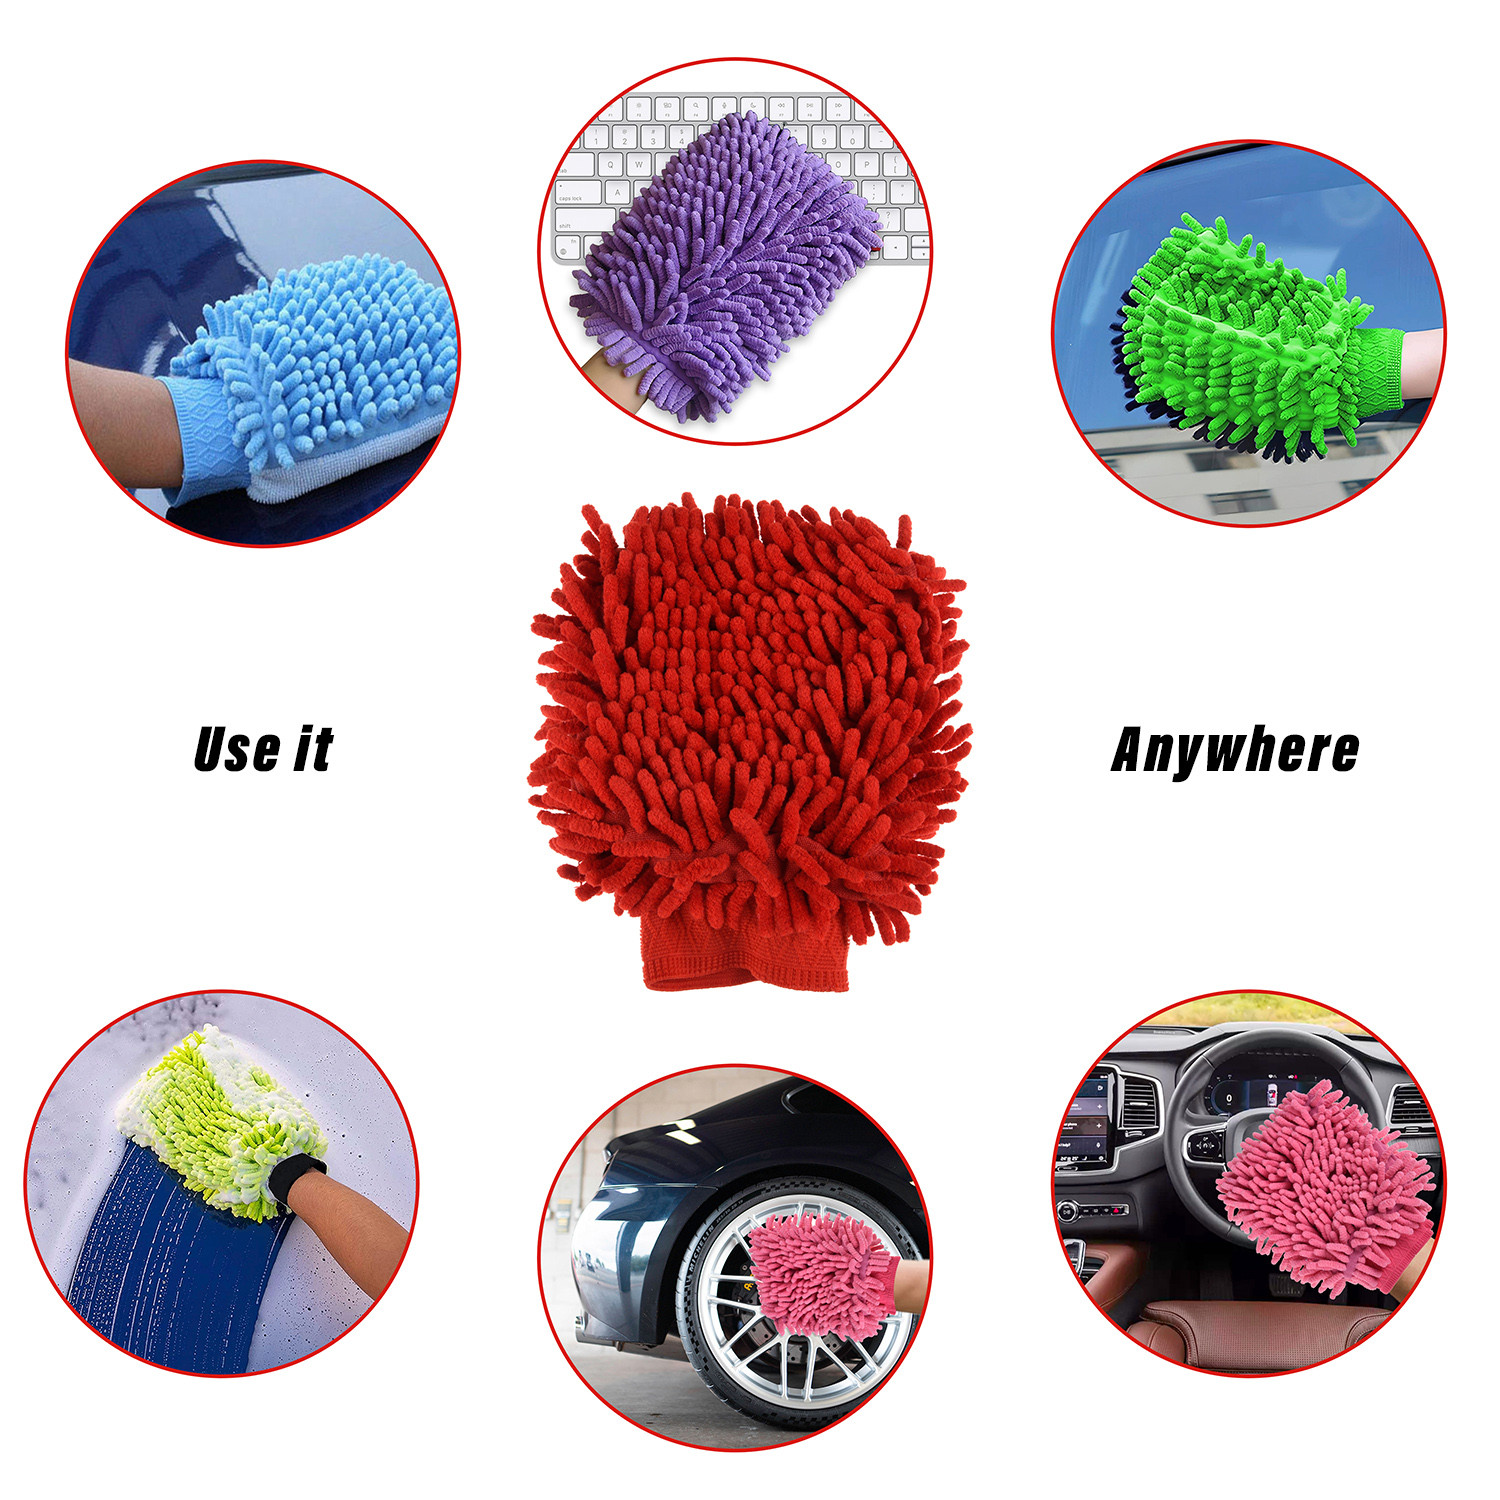 Kuber Industries Chenille Mitts|Microfiber Cleaning Gloves|Inside Waterproof Cloth Gloves|100 Gram Weighted Hand Duster|Chenille Gloves For Car|Glass|Pack of 3 (Multicolor)